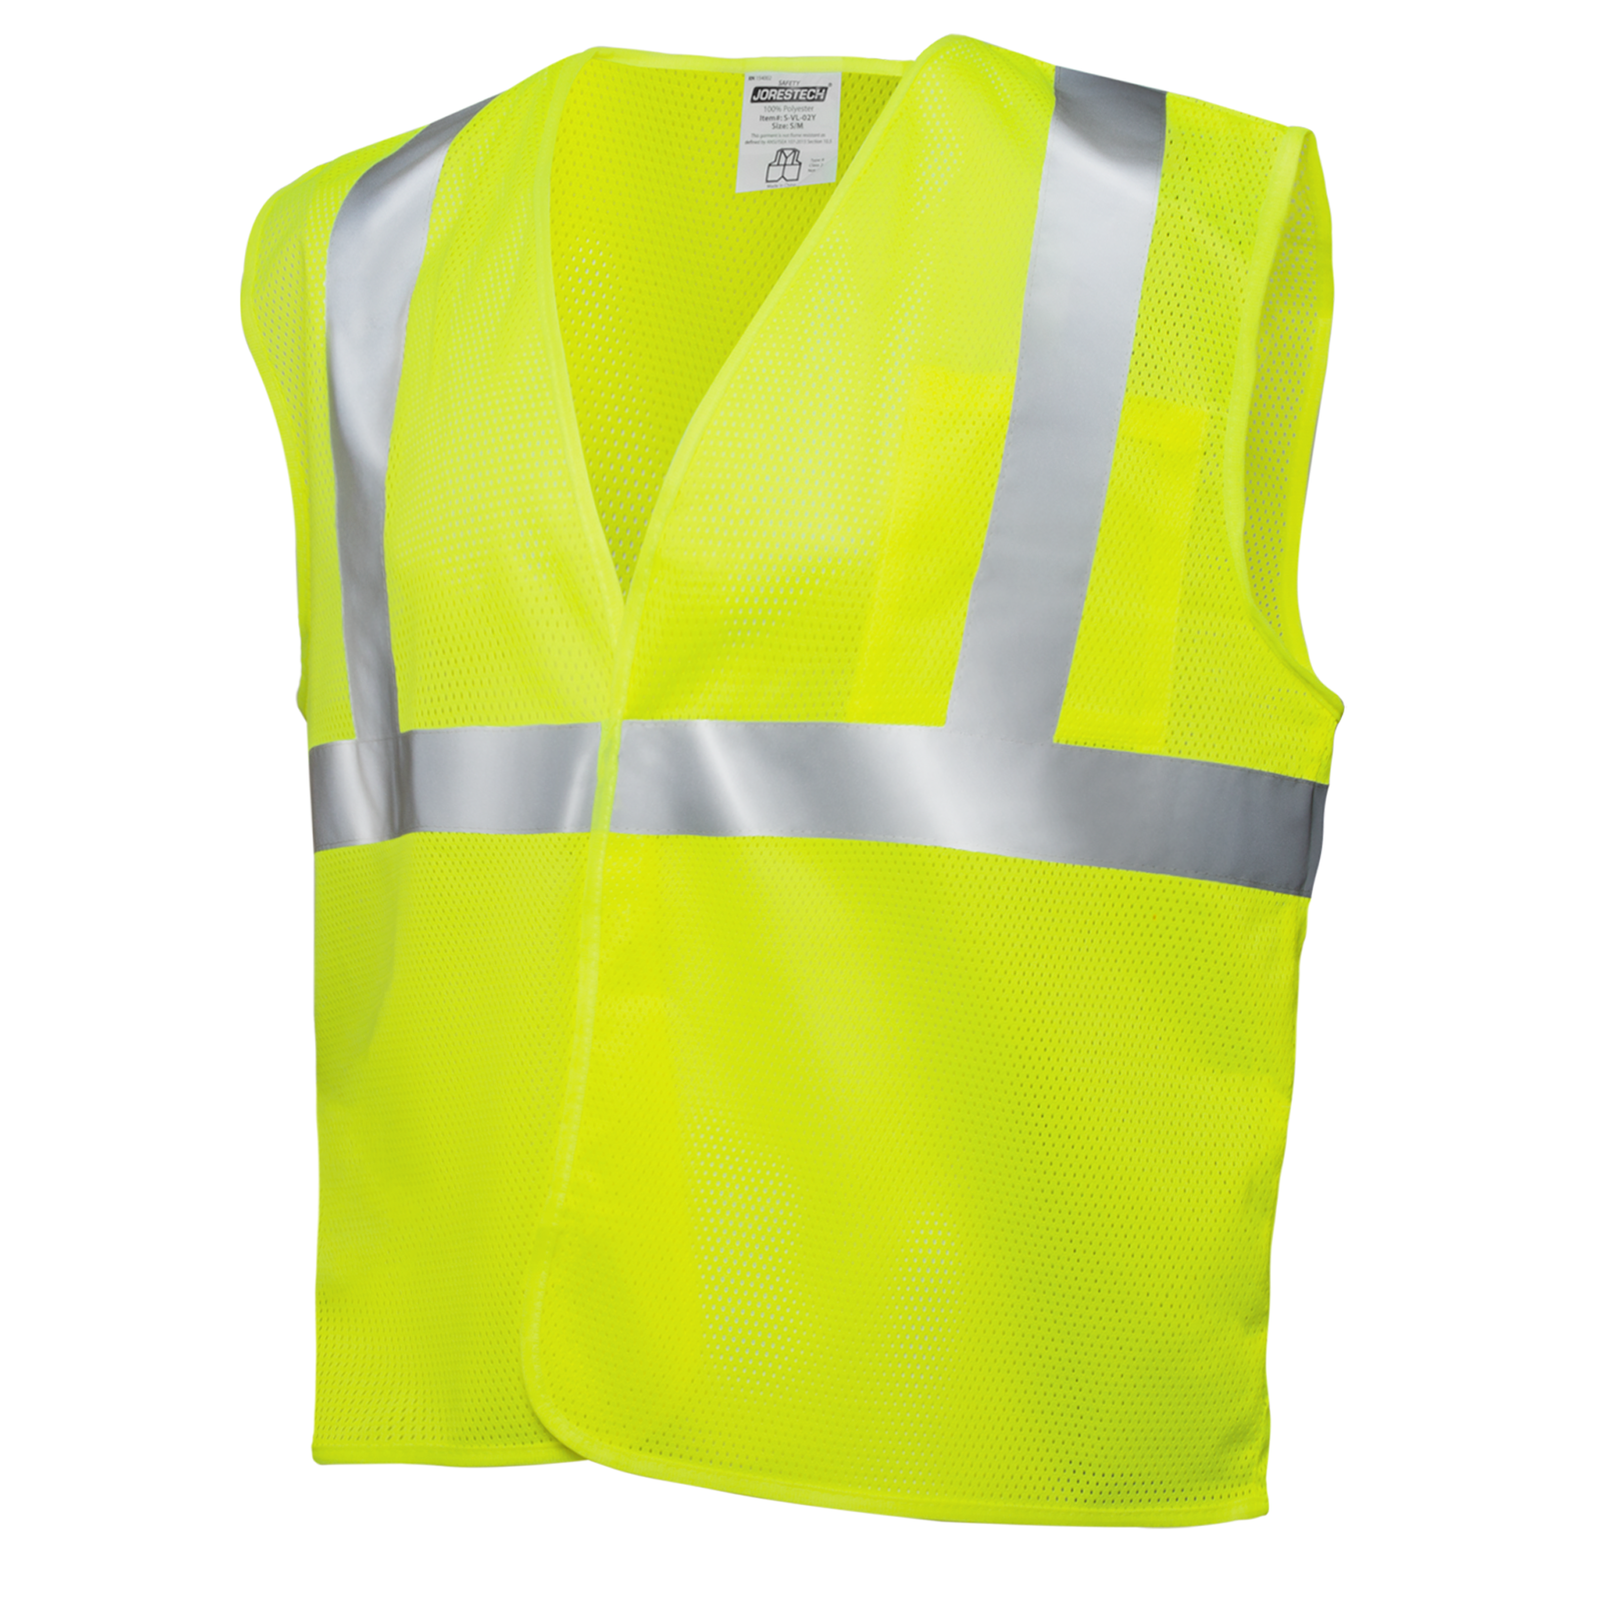 Lime/Yellow hi visibility ANSI safety vest class 2 type R with 2 inches reflective strip 